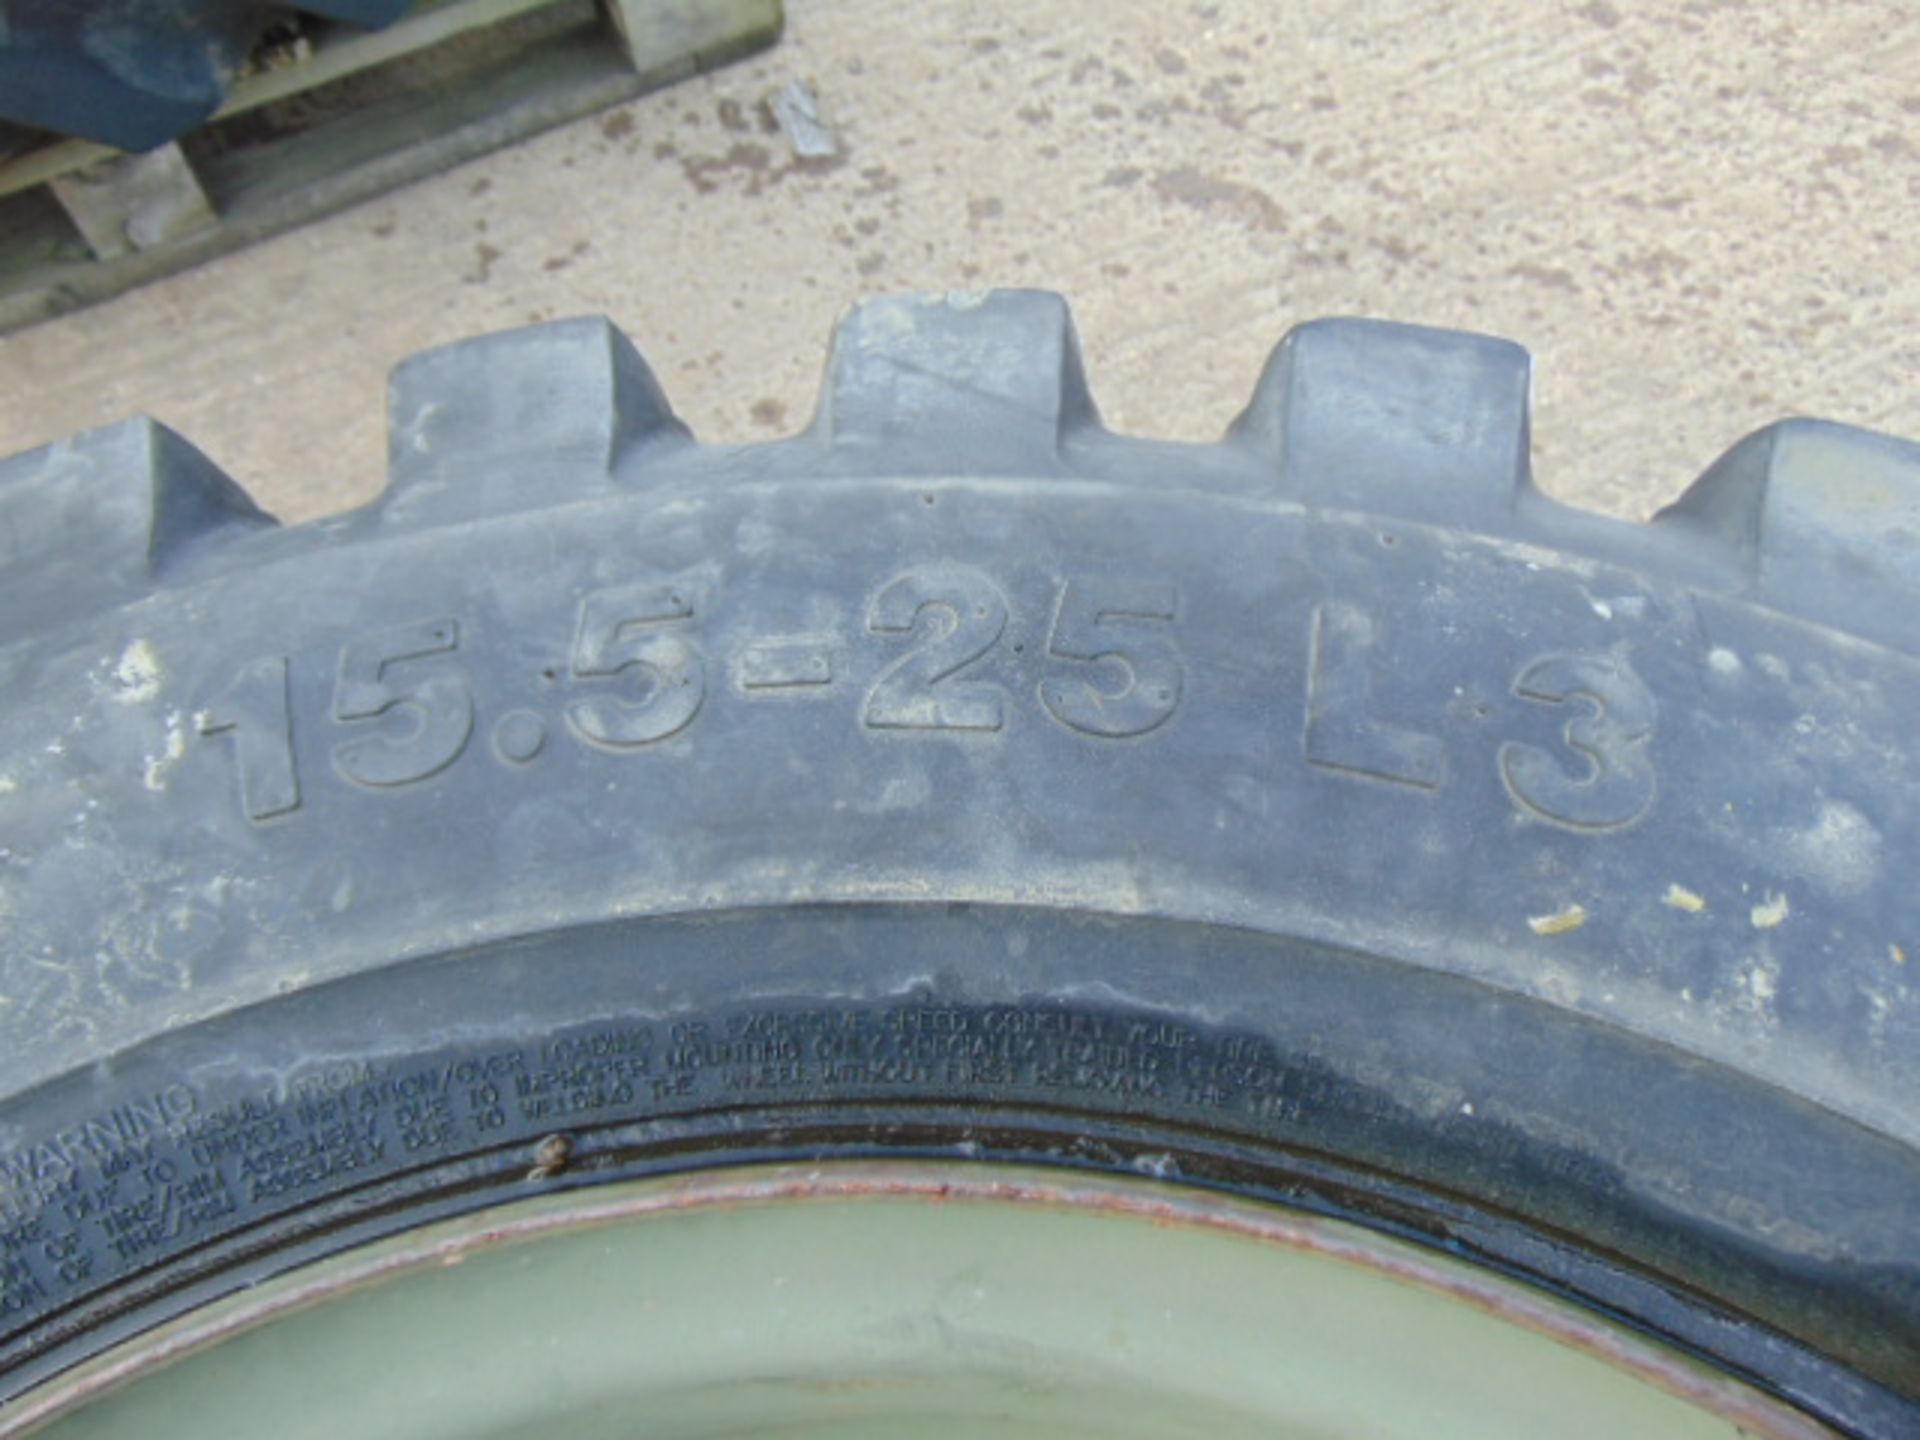 1 x Solideal Load Master 15.5-23 L3 Tyre C/W 5 Stud Rim - Image 6 of 6